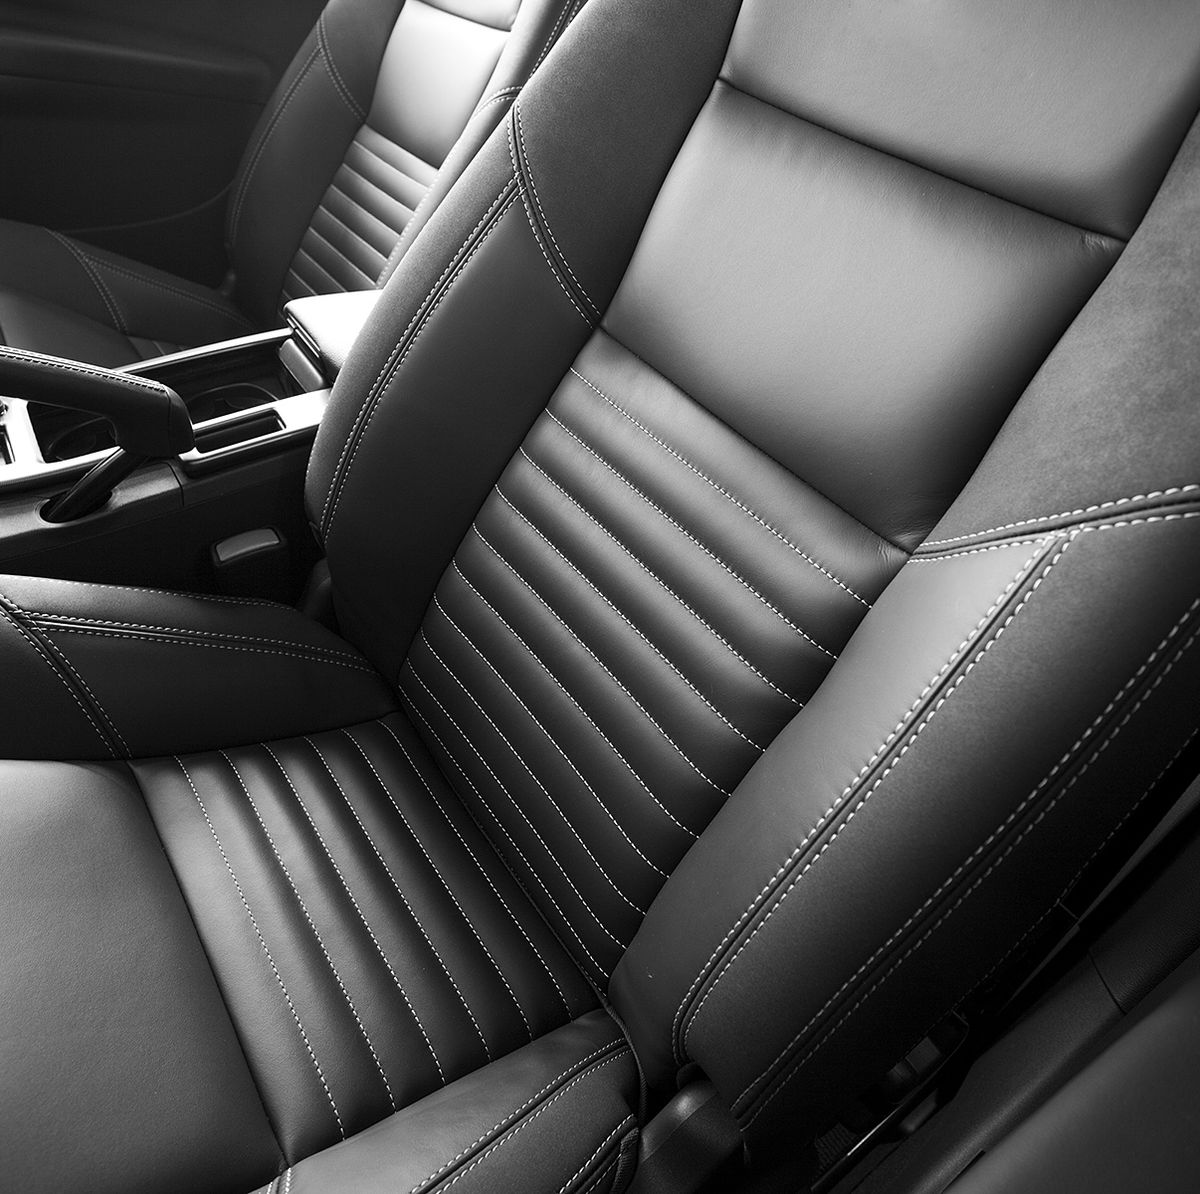 How to Clean Your Car's Cloth Seats? 3 Tips to Keep it Clean